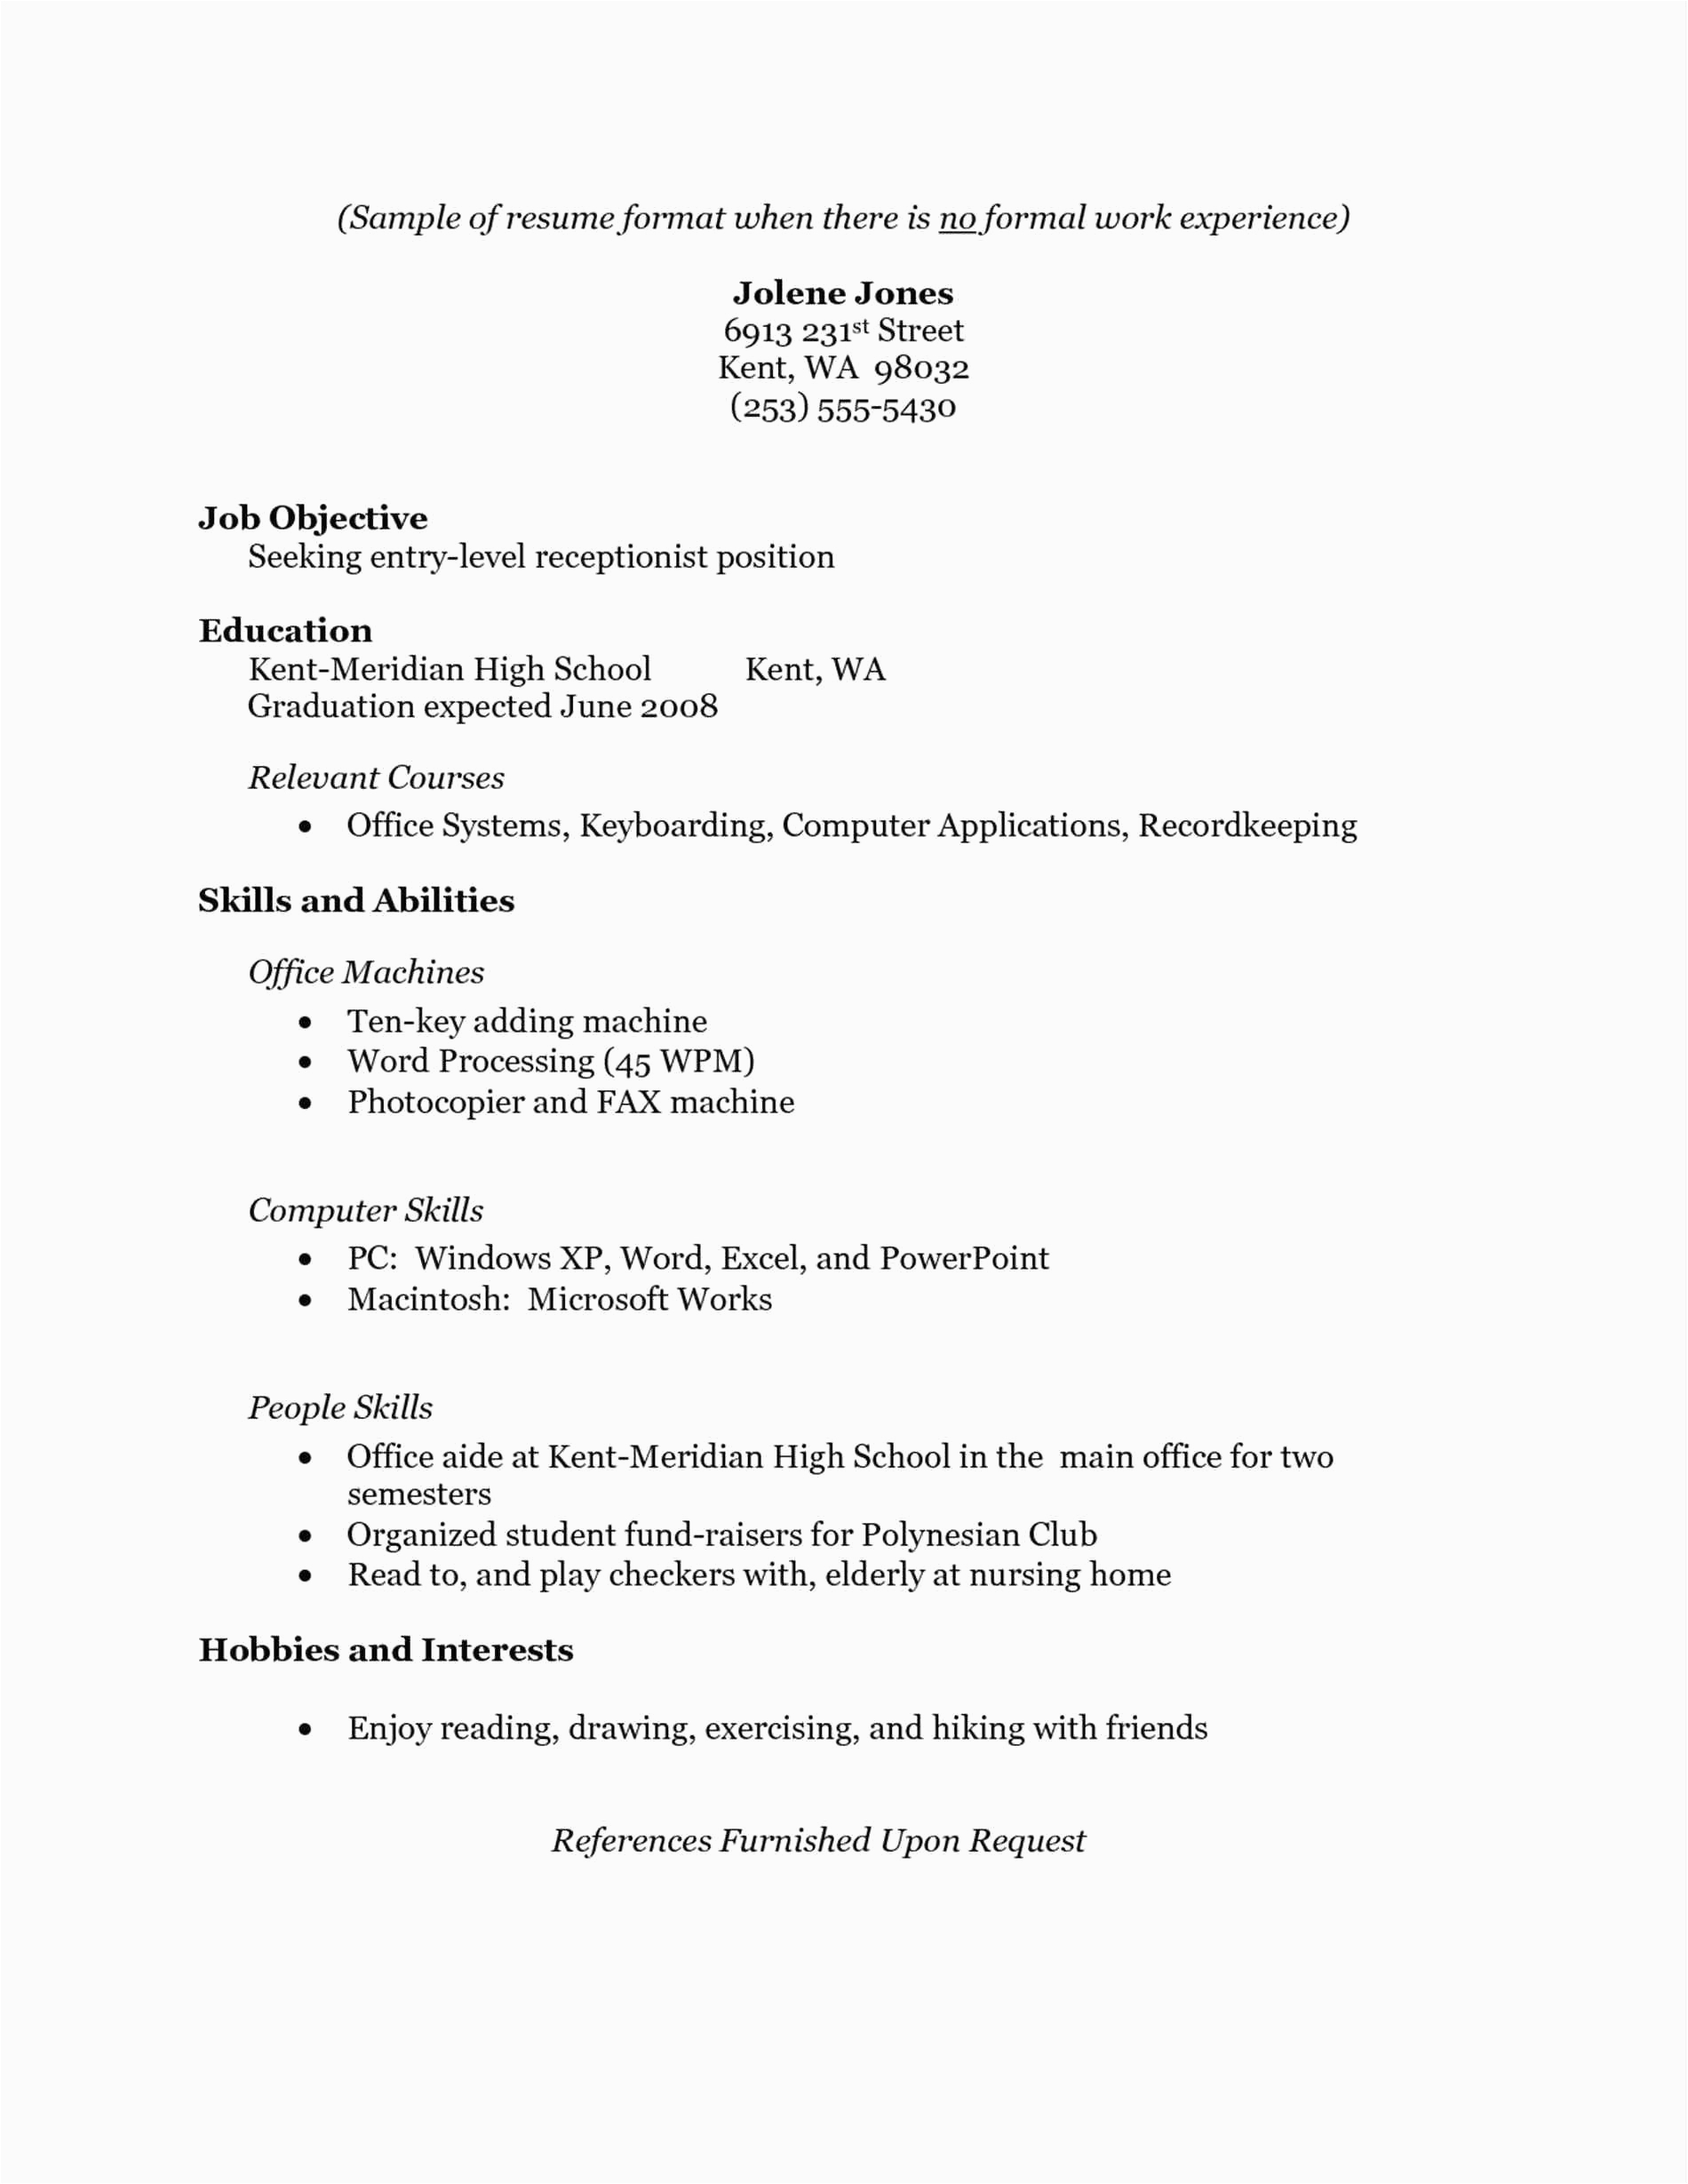 Sample Resume for Housewife with No Work Experience Housewife Resume Samples – Salescvfo